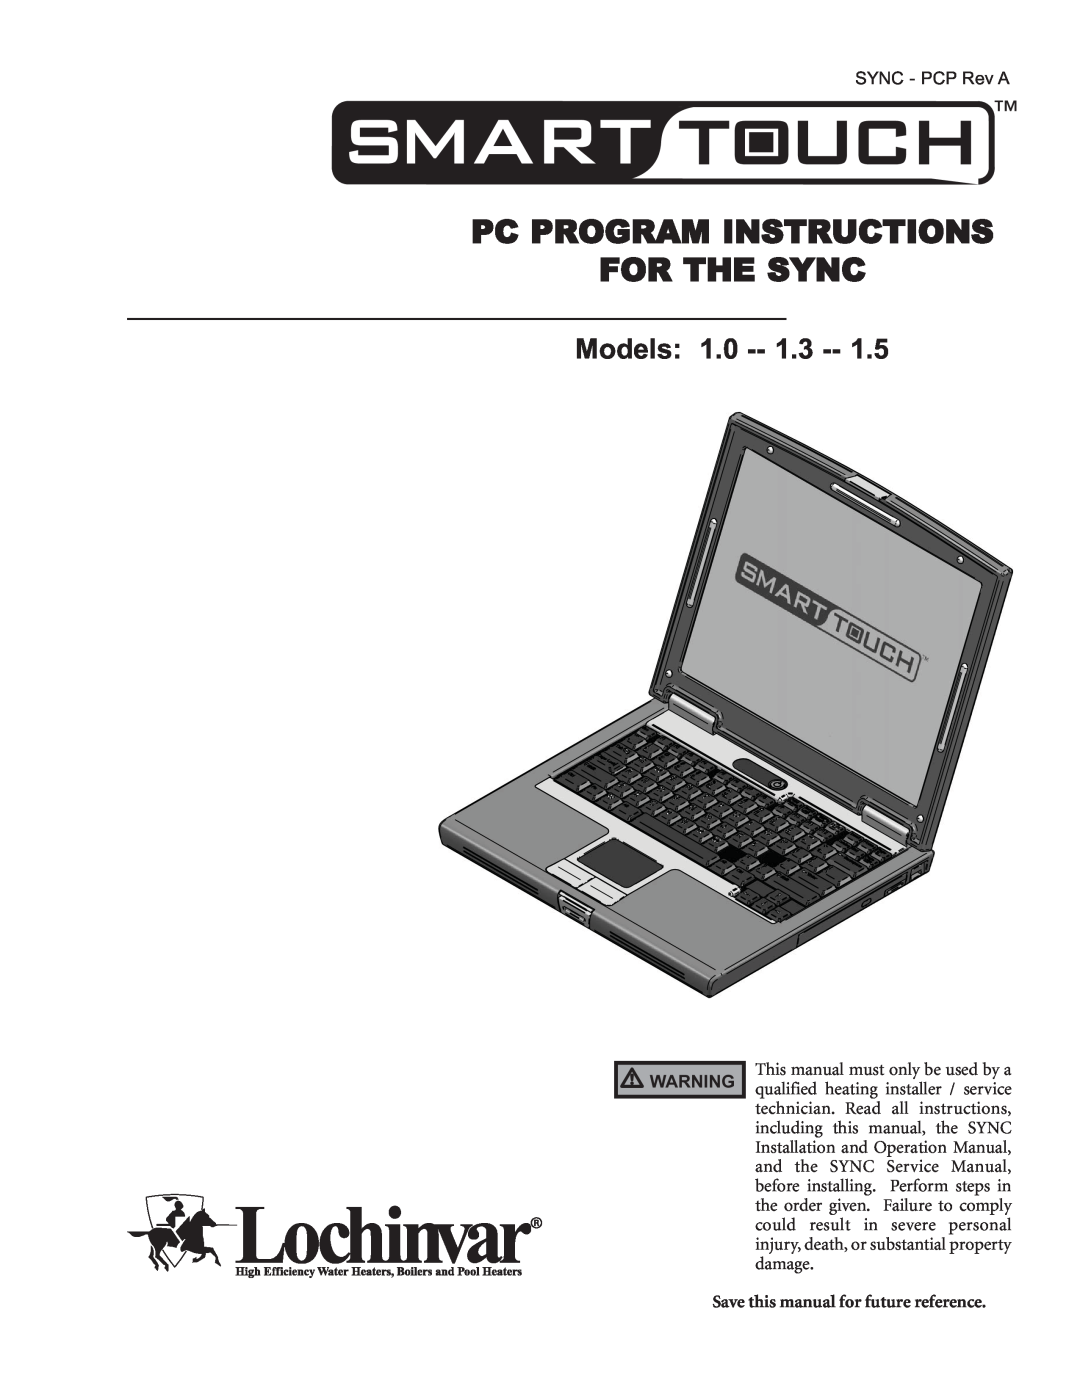 Lochinvar 1.3, 1.5 manual User’s Information Manual Models, Save this manual for future reference, SYNC-USERRev B 